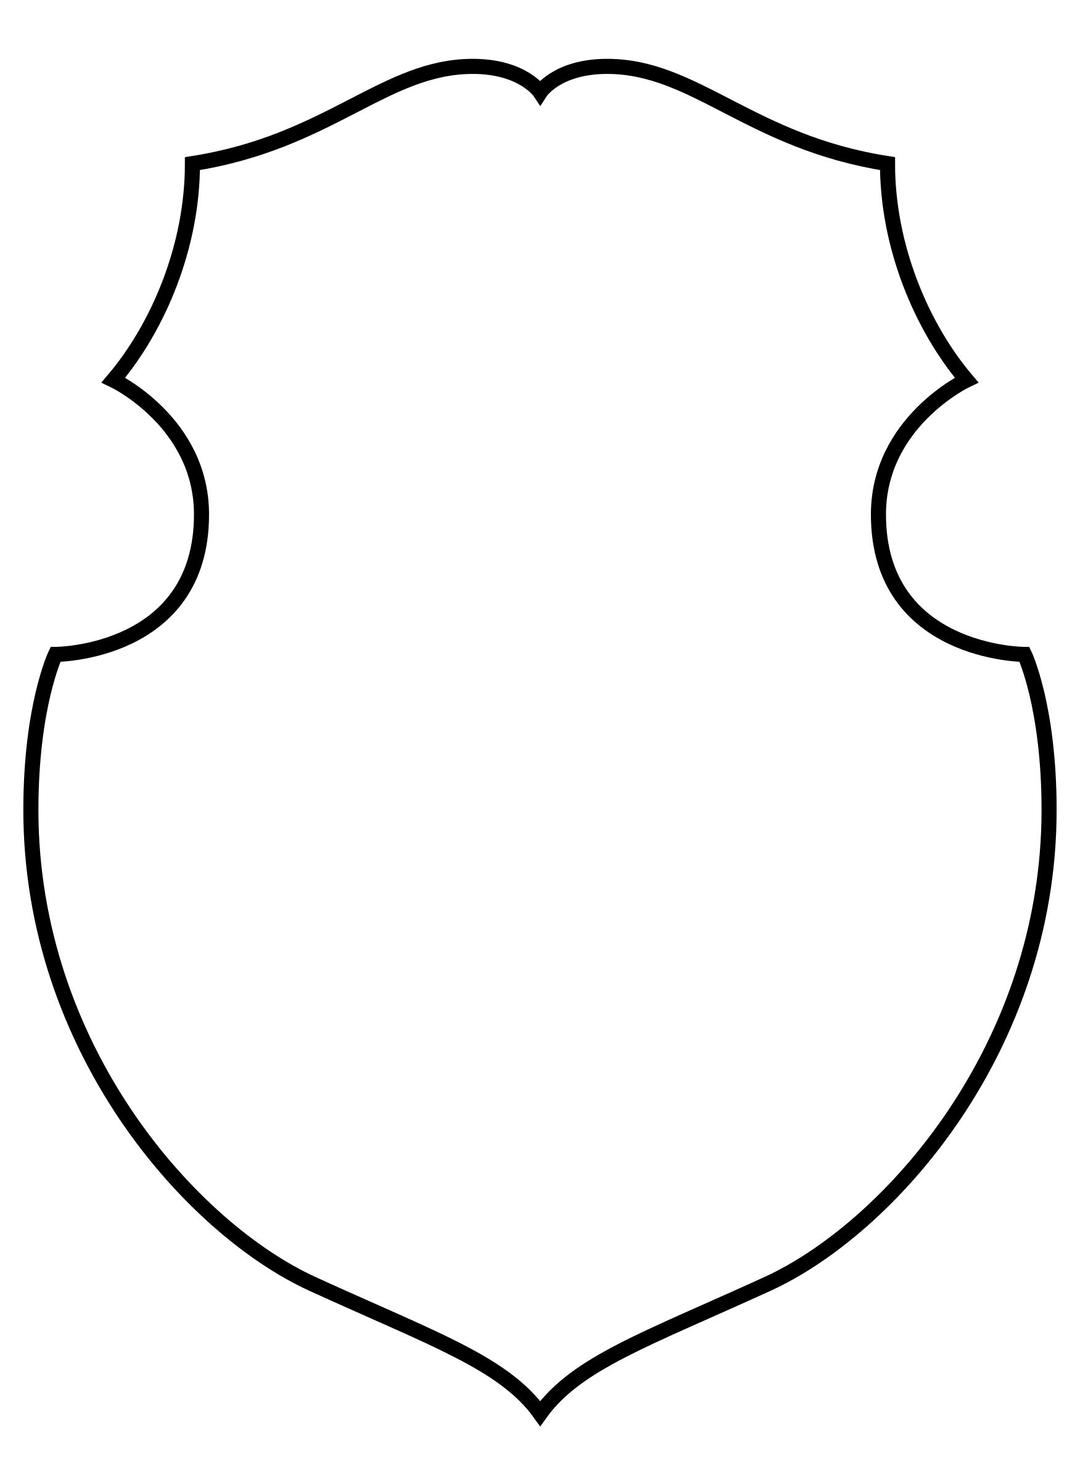 Polish or Russian Shield png transparent